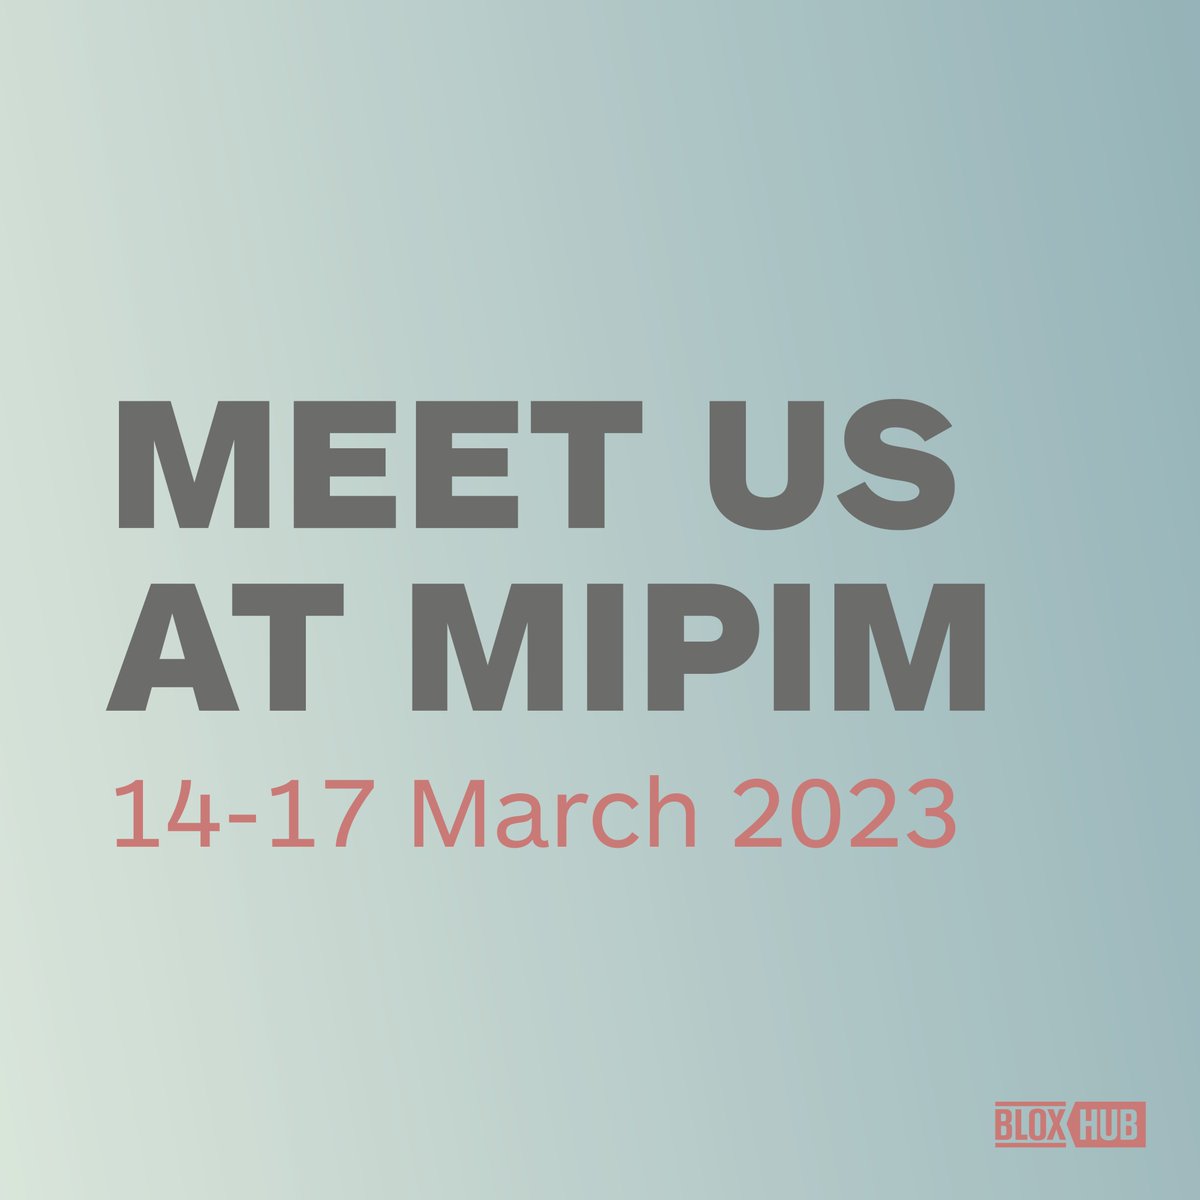 MEET US AT MIPIM. 
On 14 – 17 March, we venture to Mipim, the leading property market festival in Cannes. 
Please reach out to hear more about our matchmaking opportunities, activities, and business potentials in our ecosystem. 
We hope to see you!